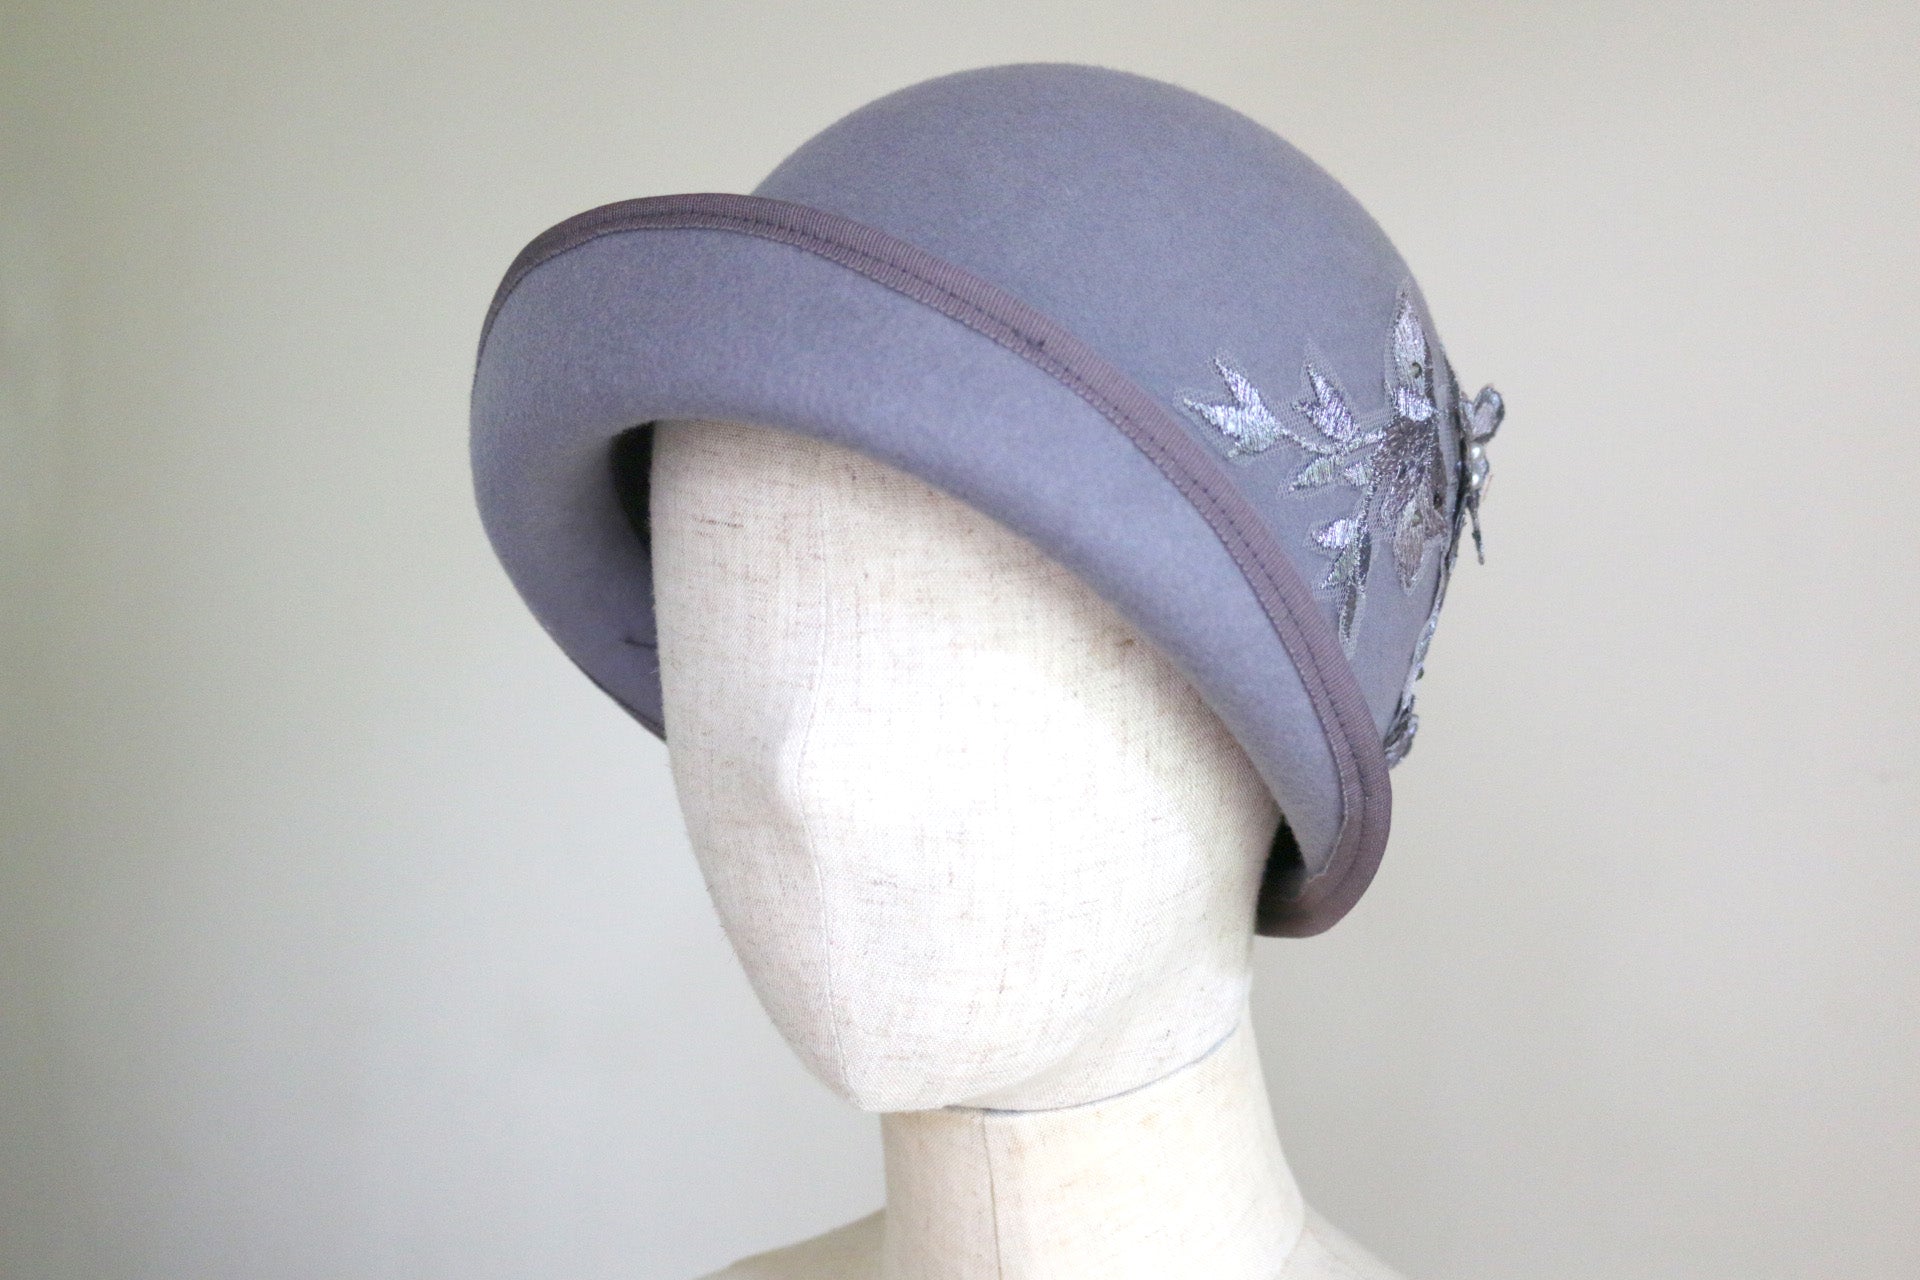 1920s Inspired Cloche Light Grey with Silver Flower